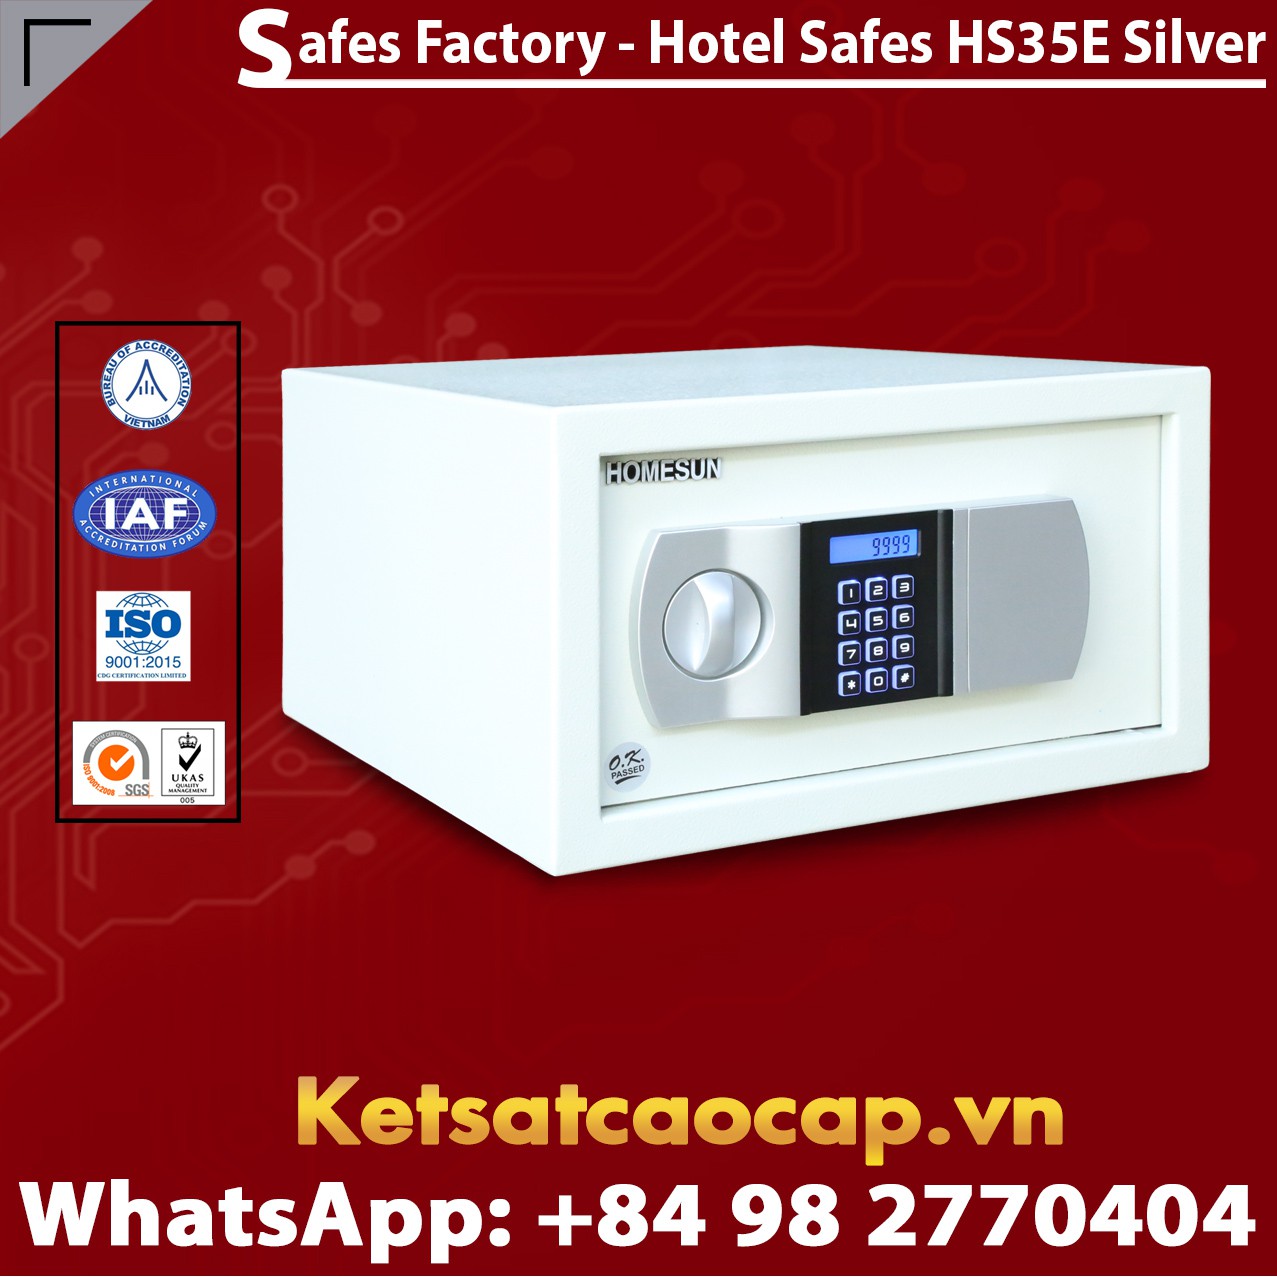 Safe in Hotel Factory